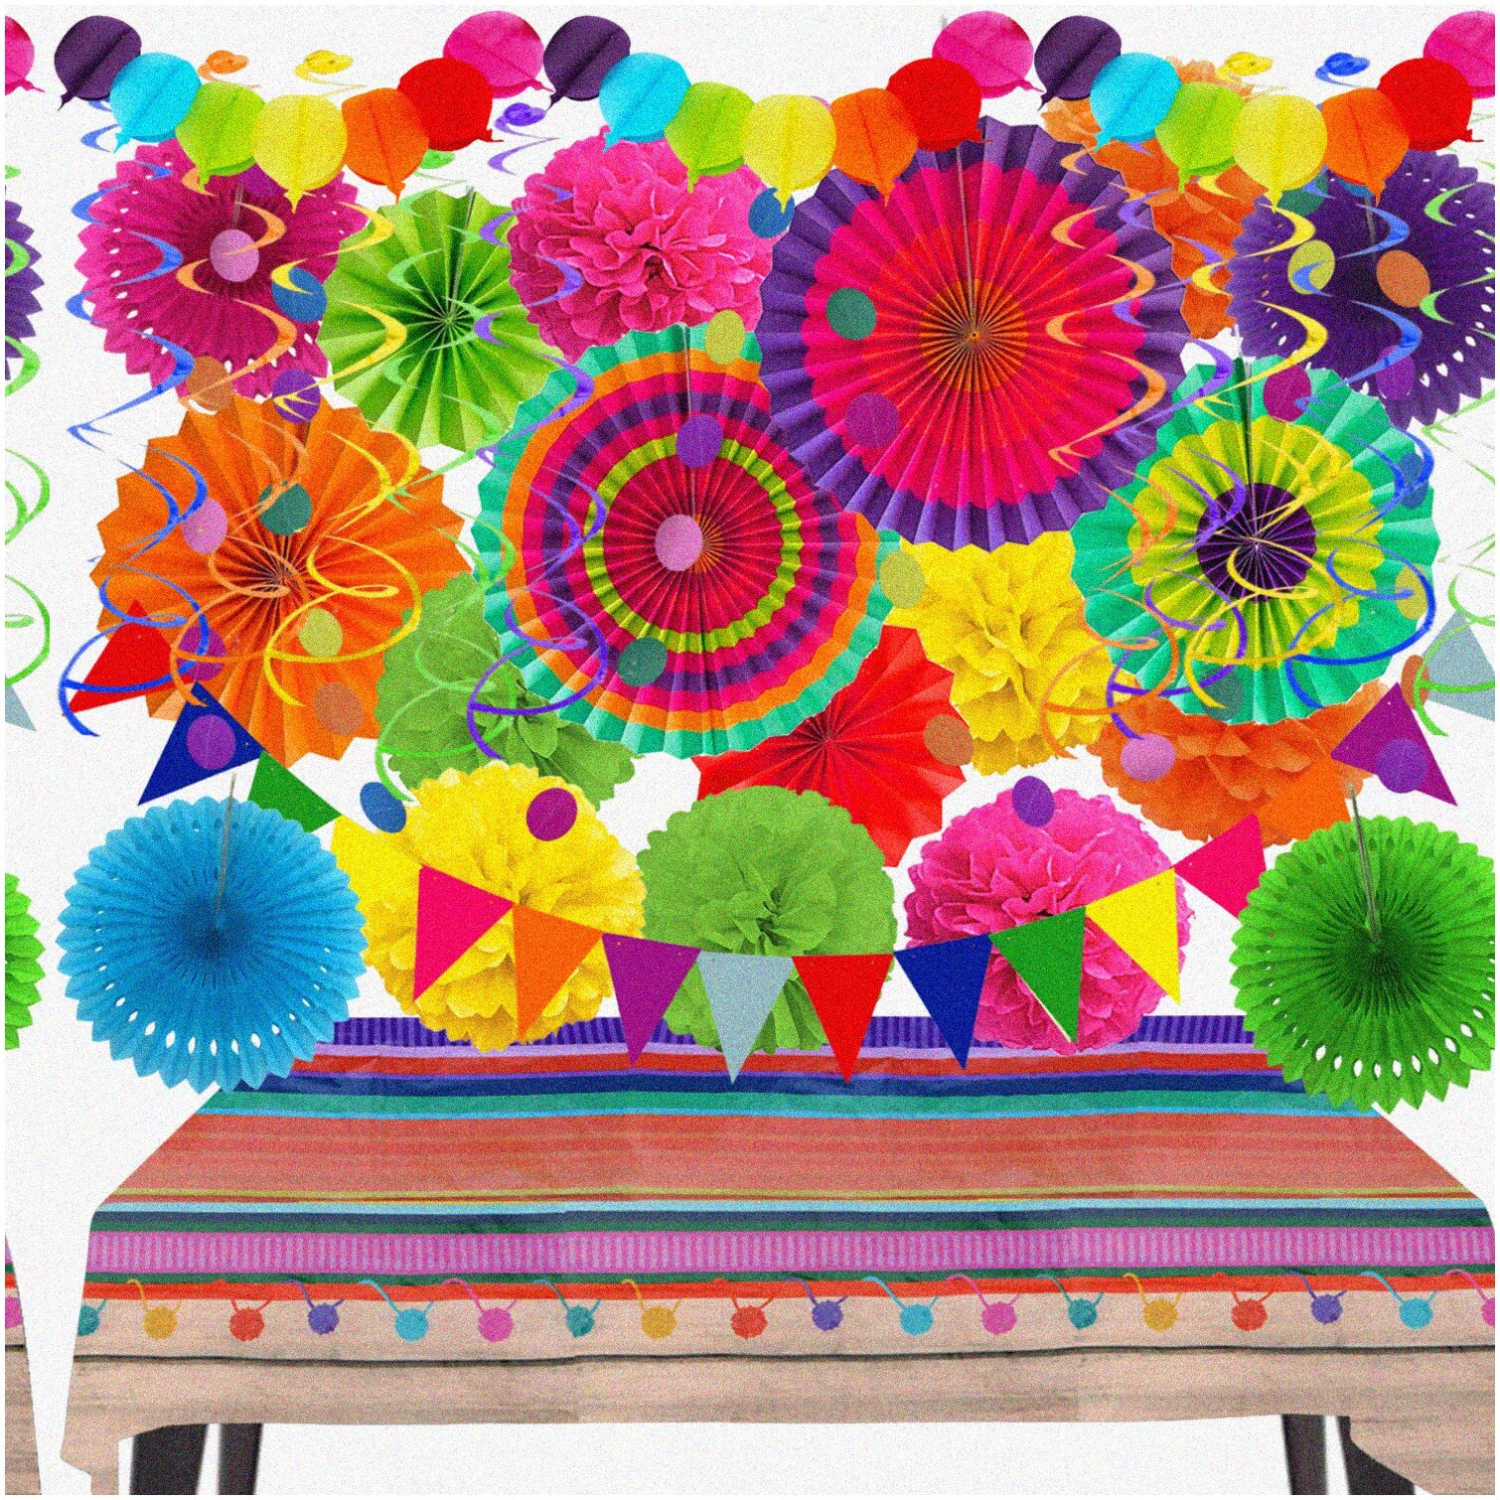 Fiesta Fun Pack: Multicoloured Tablecover, Paper Fans, Pompoms, Balloon Garlands, Hanging Swirls - Mexican Cinco De Mayo & Taco Party Supplies